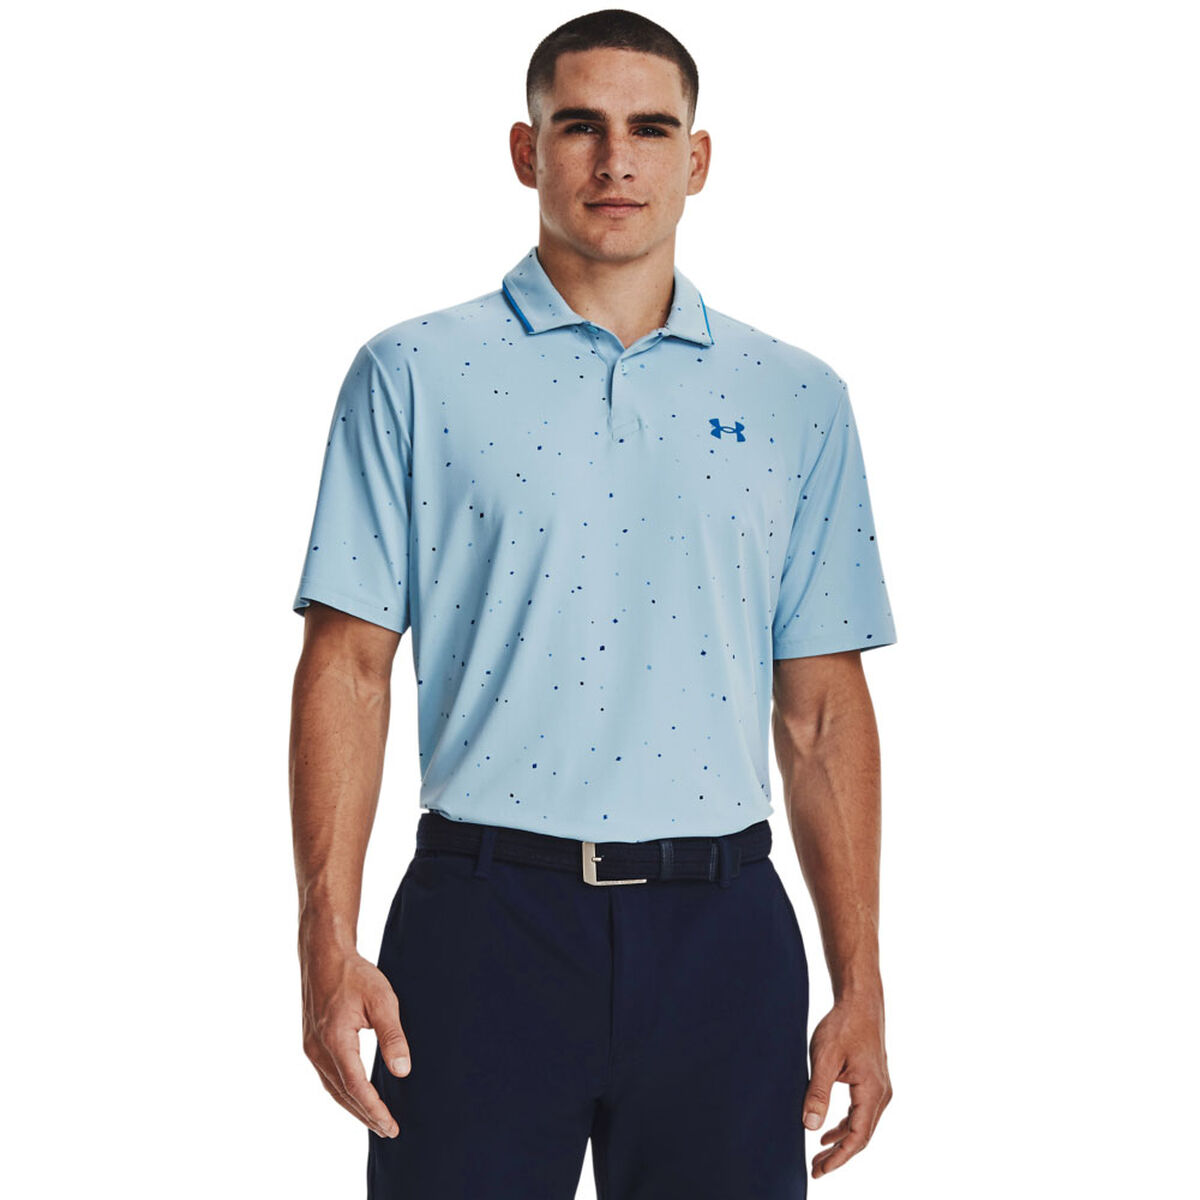 Under Armour Men’s Iso-Chill Verge Golf Polo Shirt, Mens, Blizzard/cosmic blue, Small | American Golf